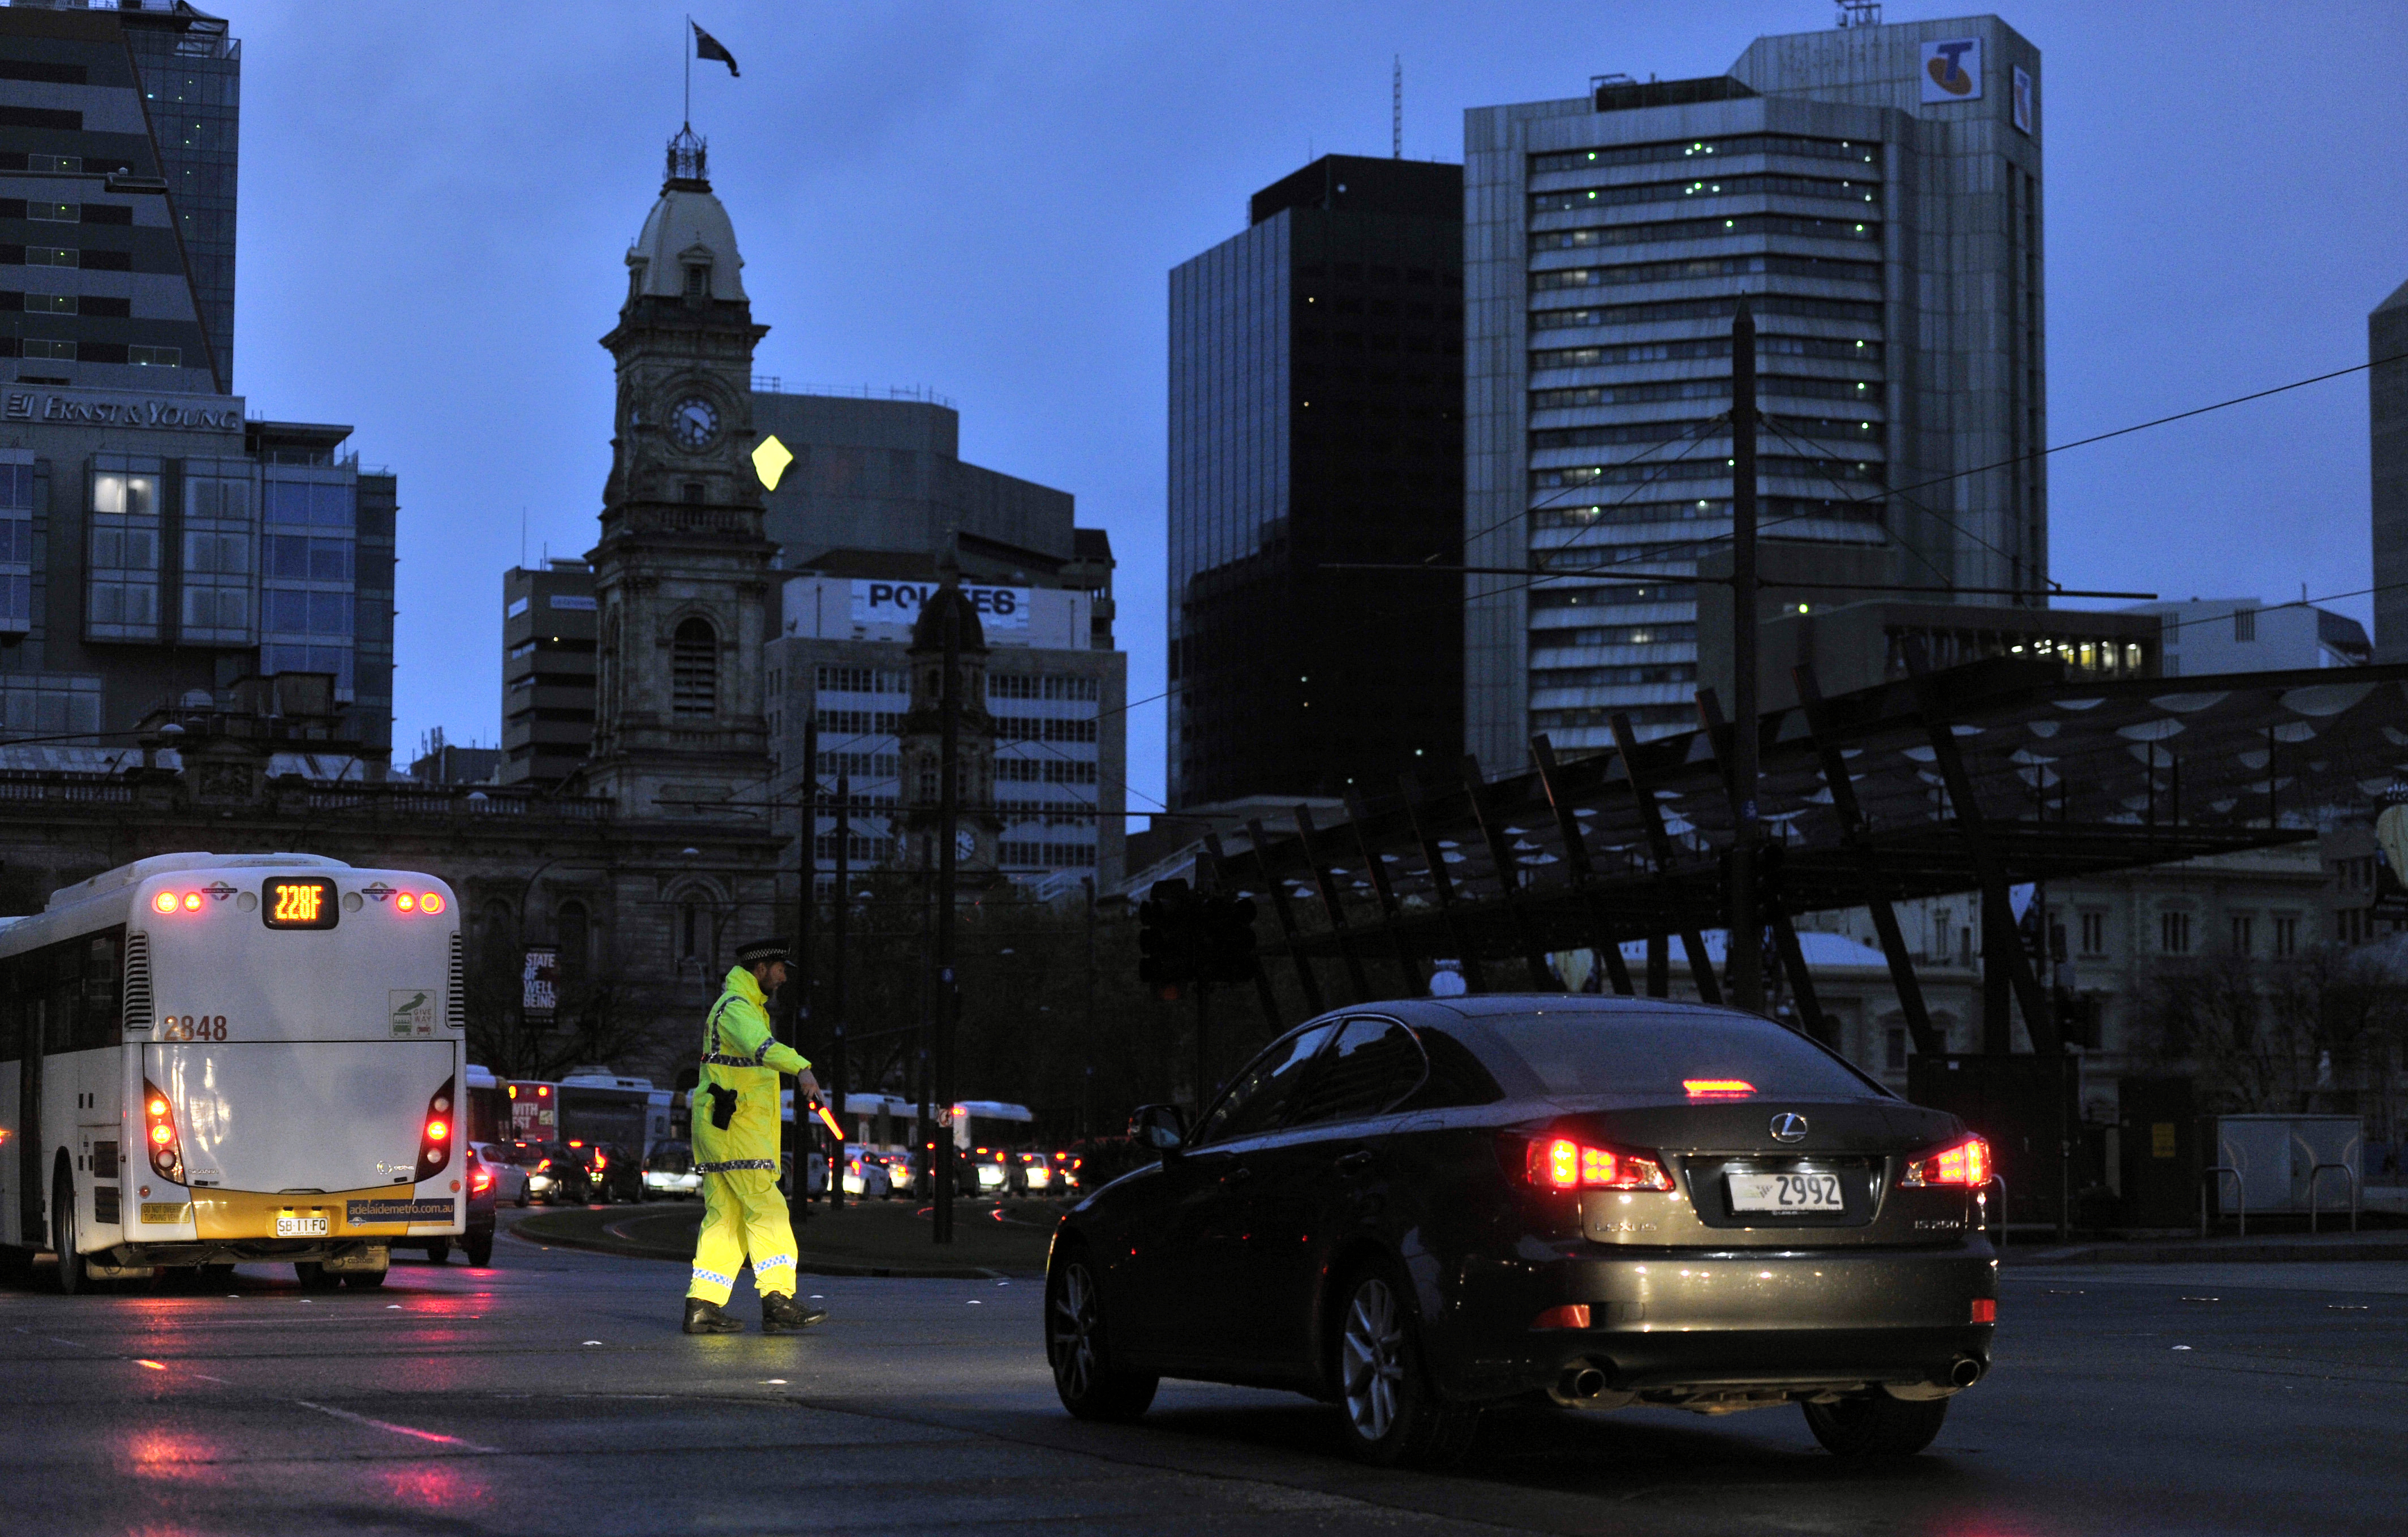 Police direct traffic in Adelaide on Sept. 28, 2016, after the power network stopped working, creating a broad blackout in South Australia (David Mariuz—EPA)